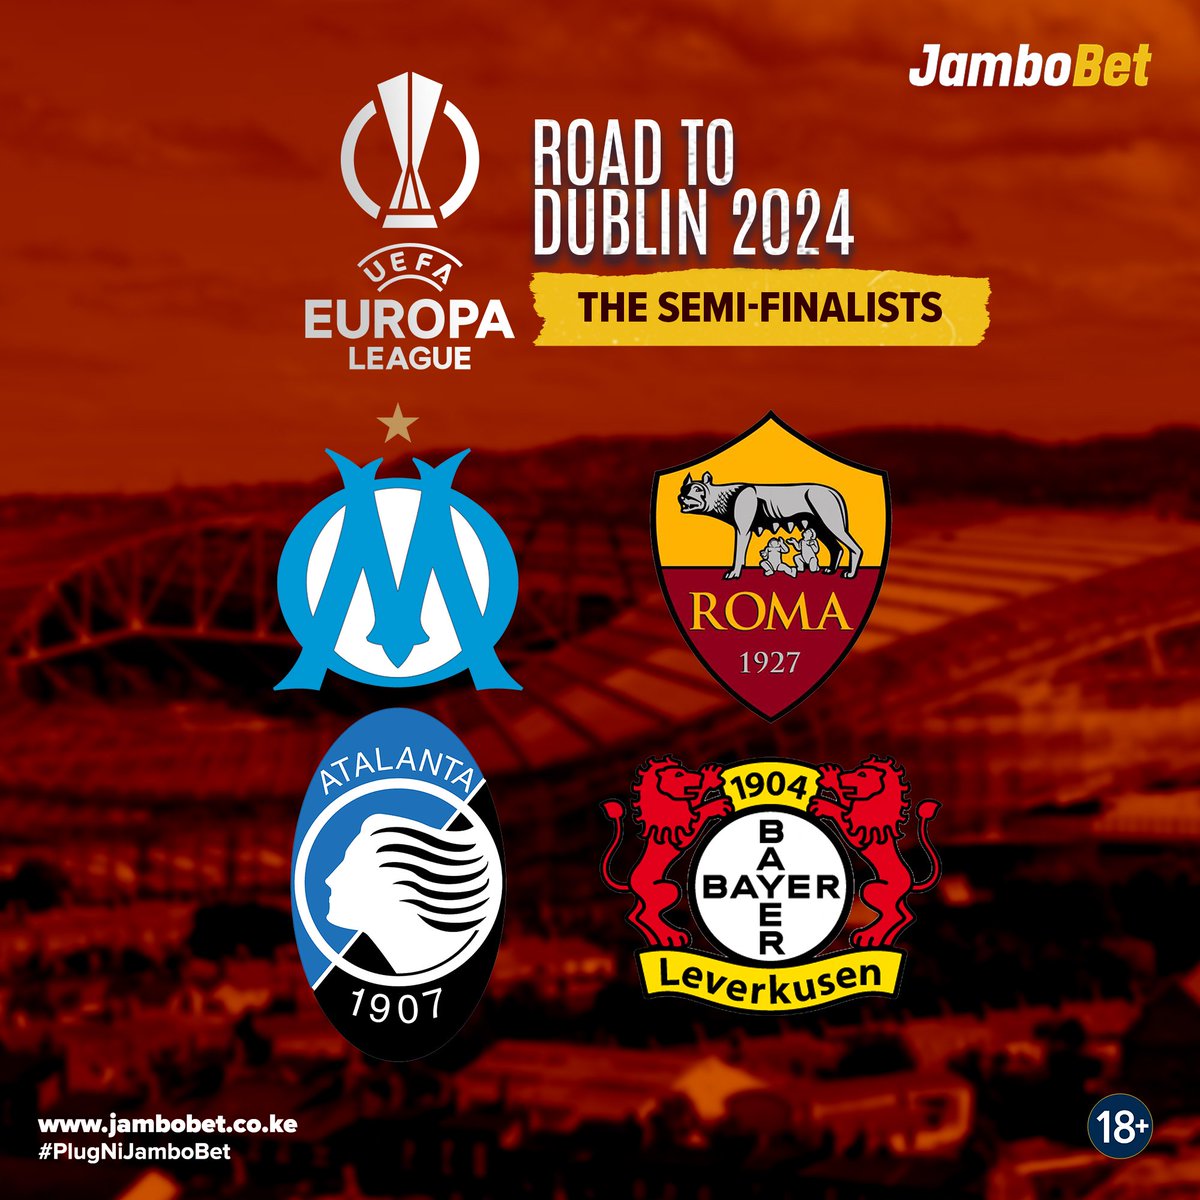 Europa League has shaped up properly.Semi finalists ndio hawa. The road to Dublin is not easy.

#PlugNiJamboBet
#PlayResponsibly